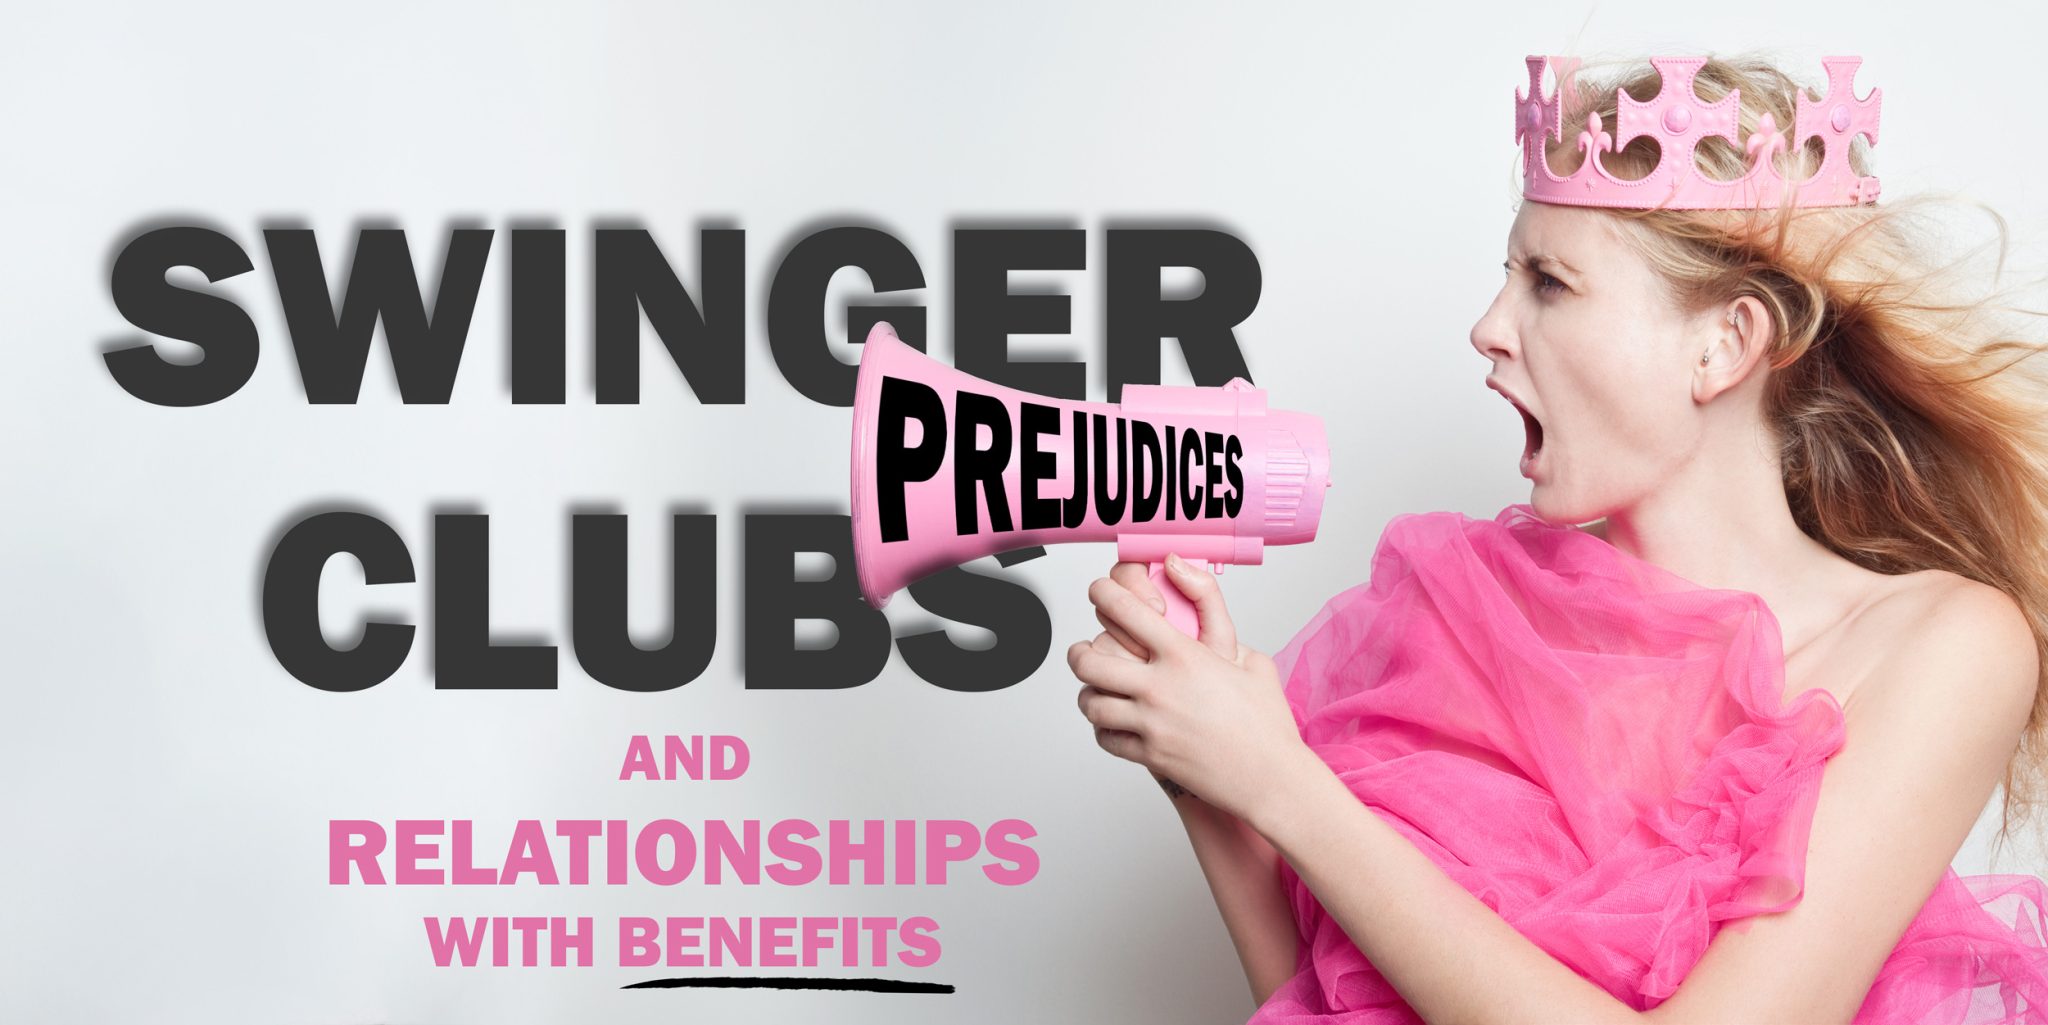 Prejudices about swinger clubs and relationships with benefits - photo